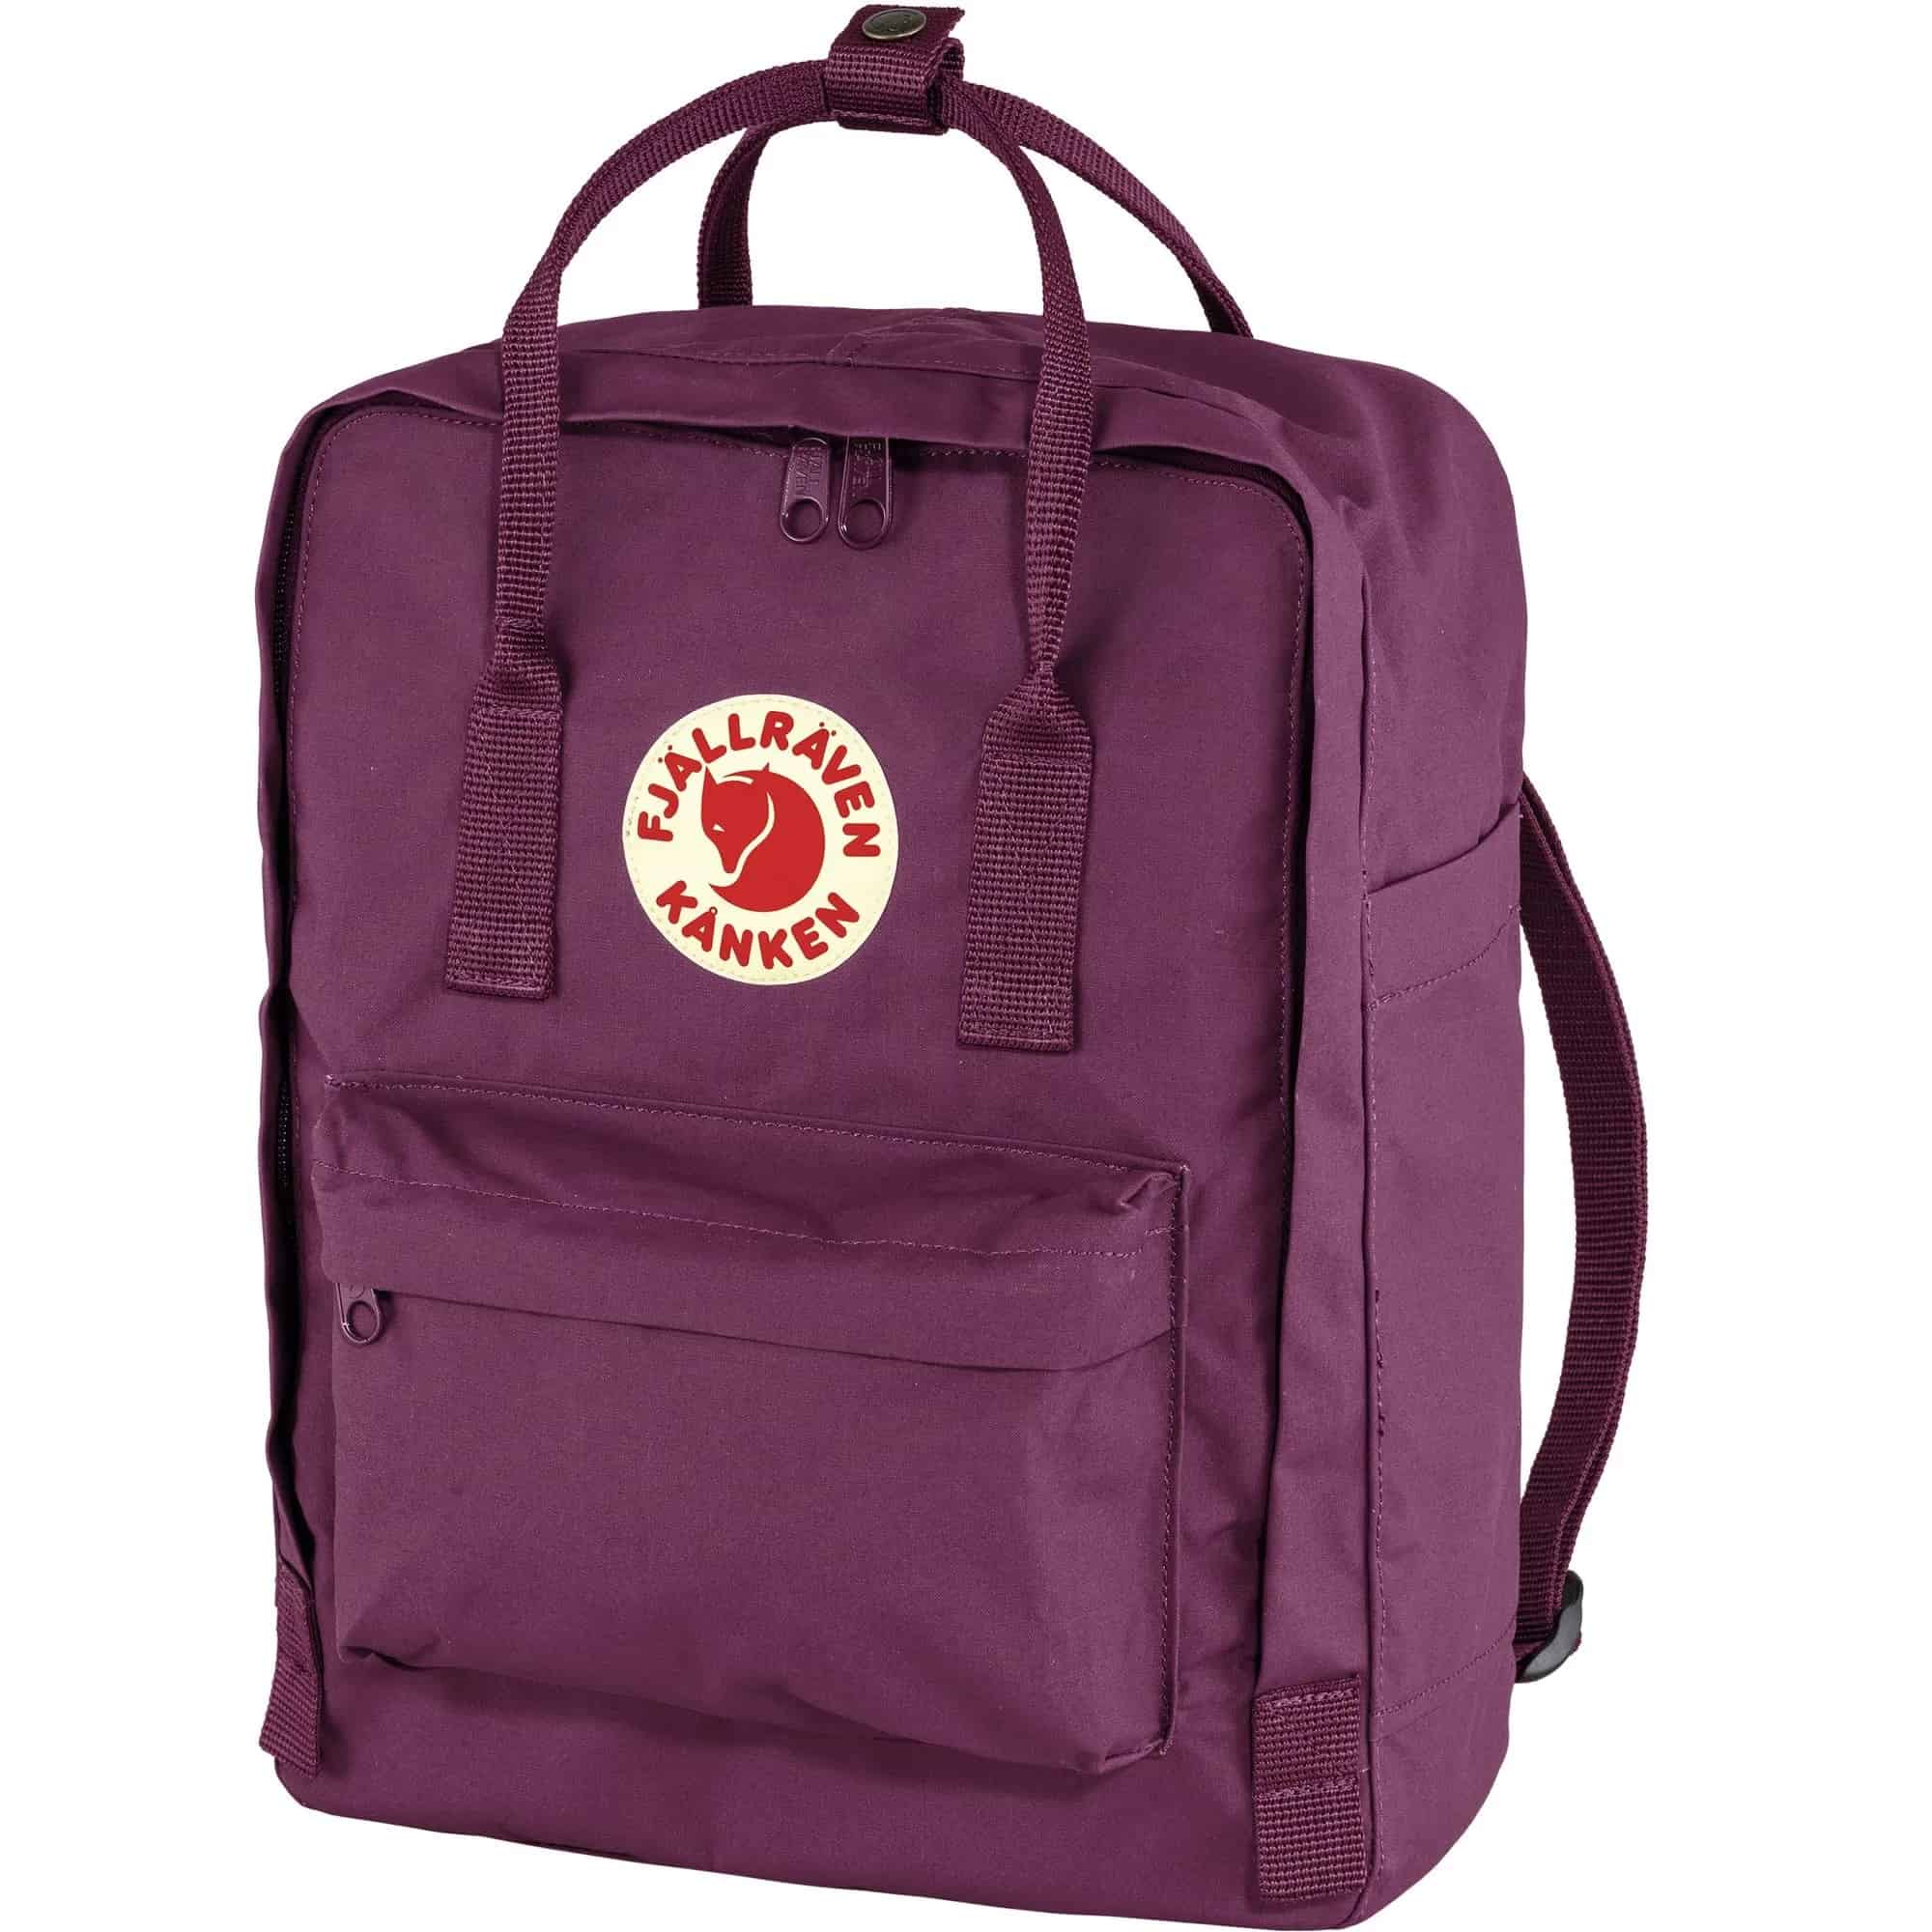 Fjallraven Review - Must Read This Before Buying